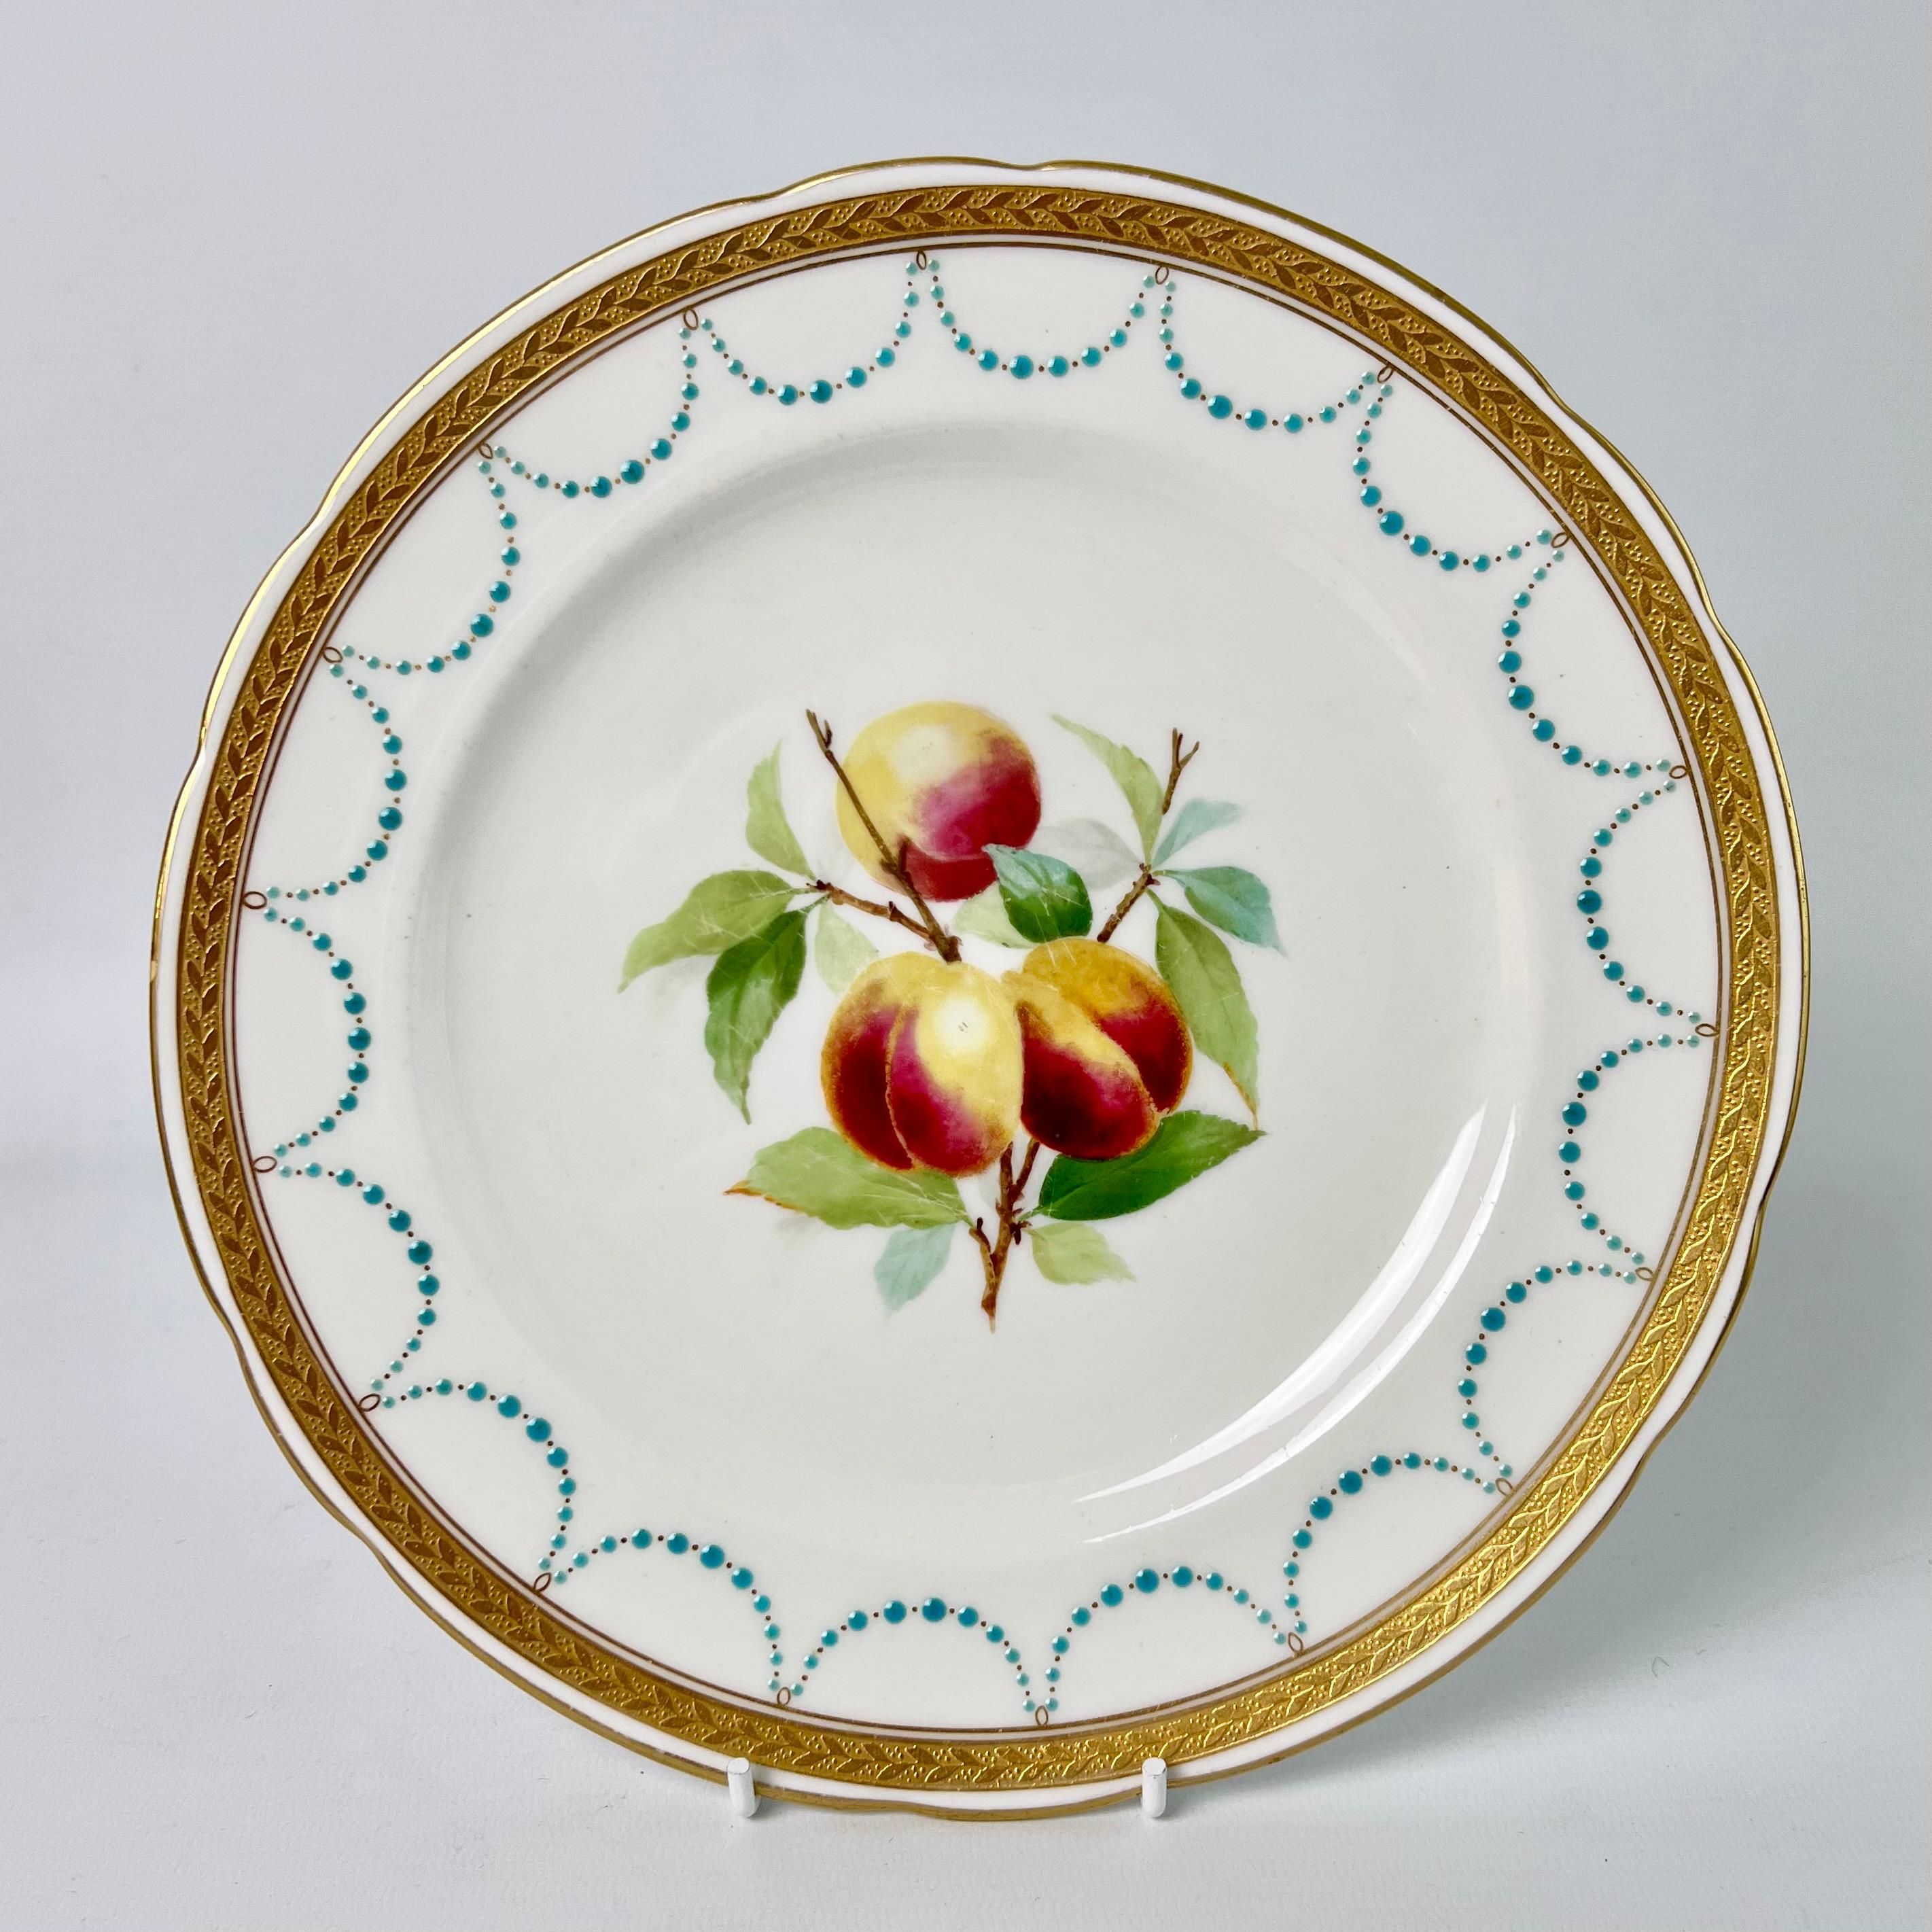 Minton Porcelain Dessert Service, Turquoise and Gilt, Flowers and Fruits, 1870 11